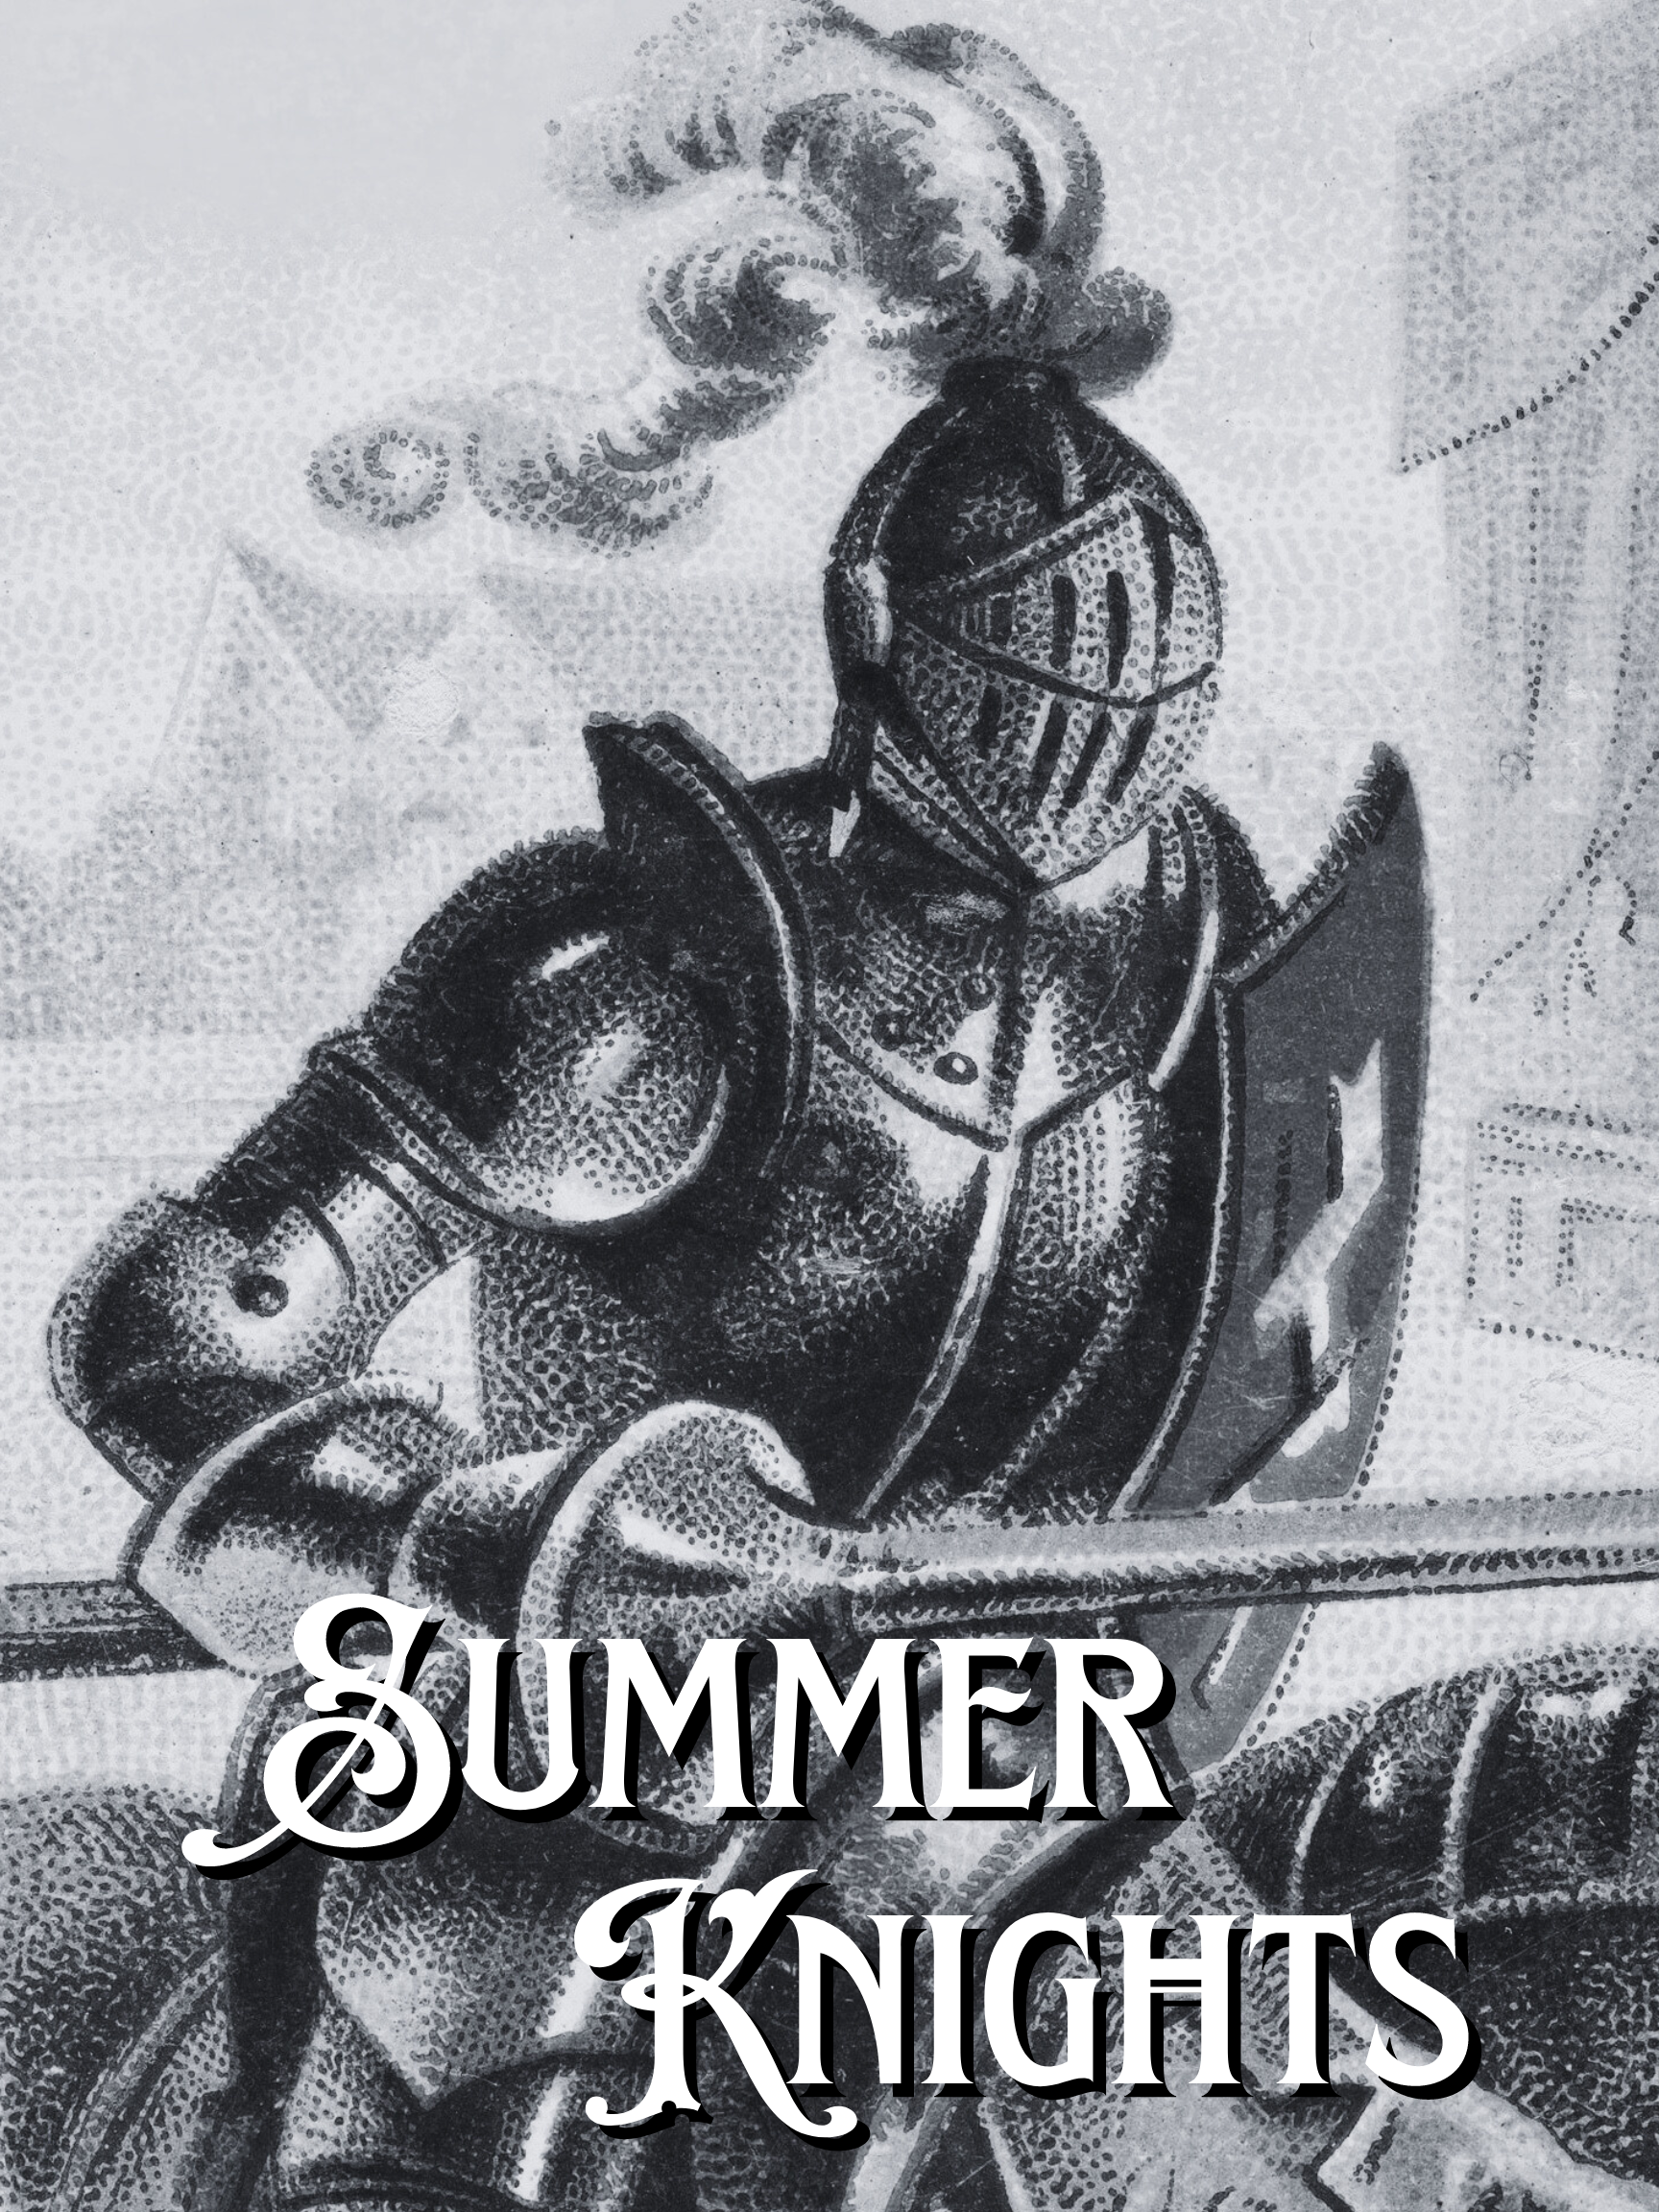 A knight in full plate armor sits astride a horse, his lance pointed forward as if he is about to joust. Over the bottom of the image is the text "Summer Knights."